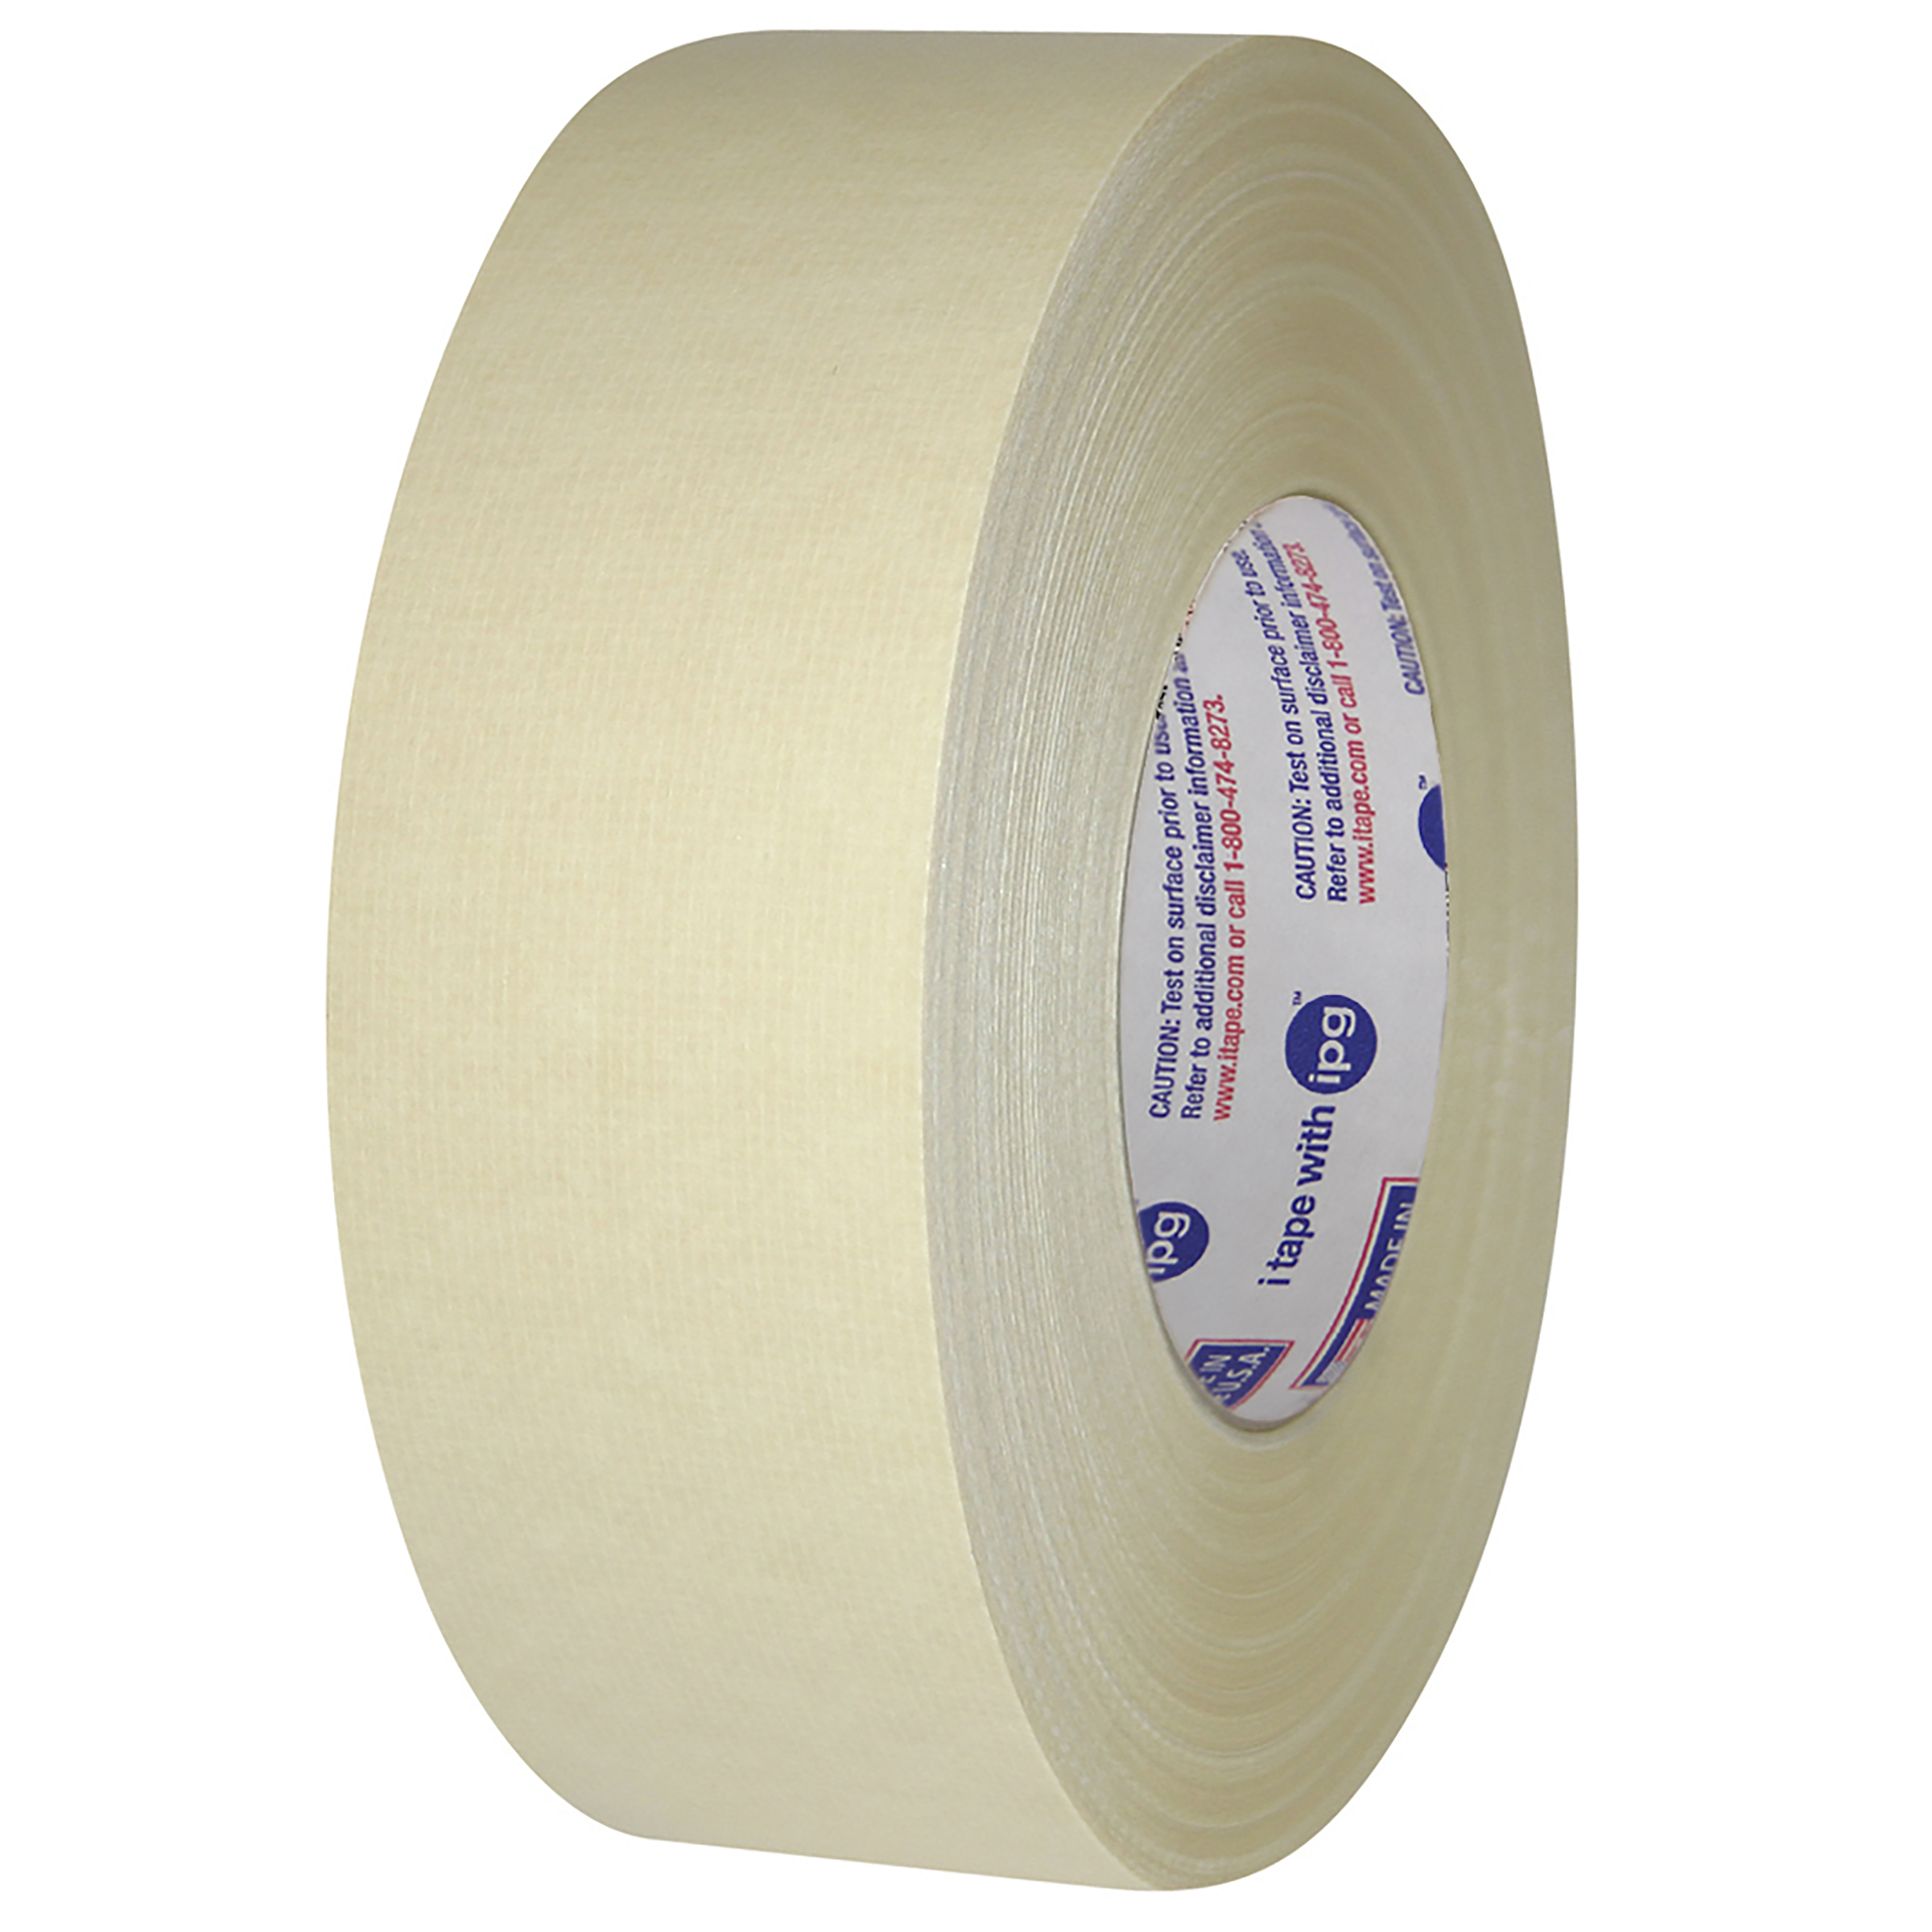 How to Measure the Physical Properties of Adhesive Tapes